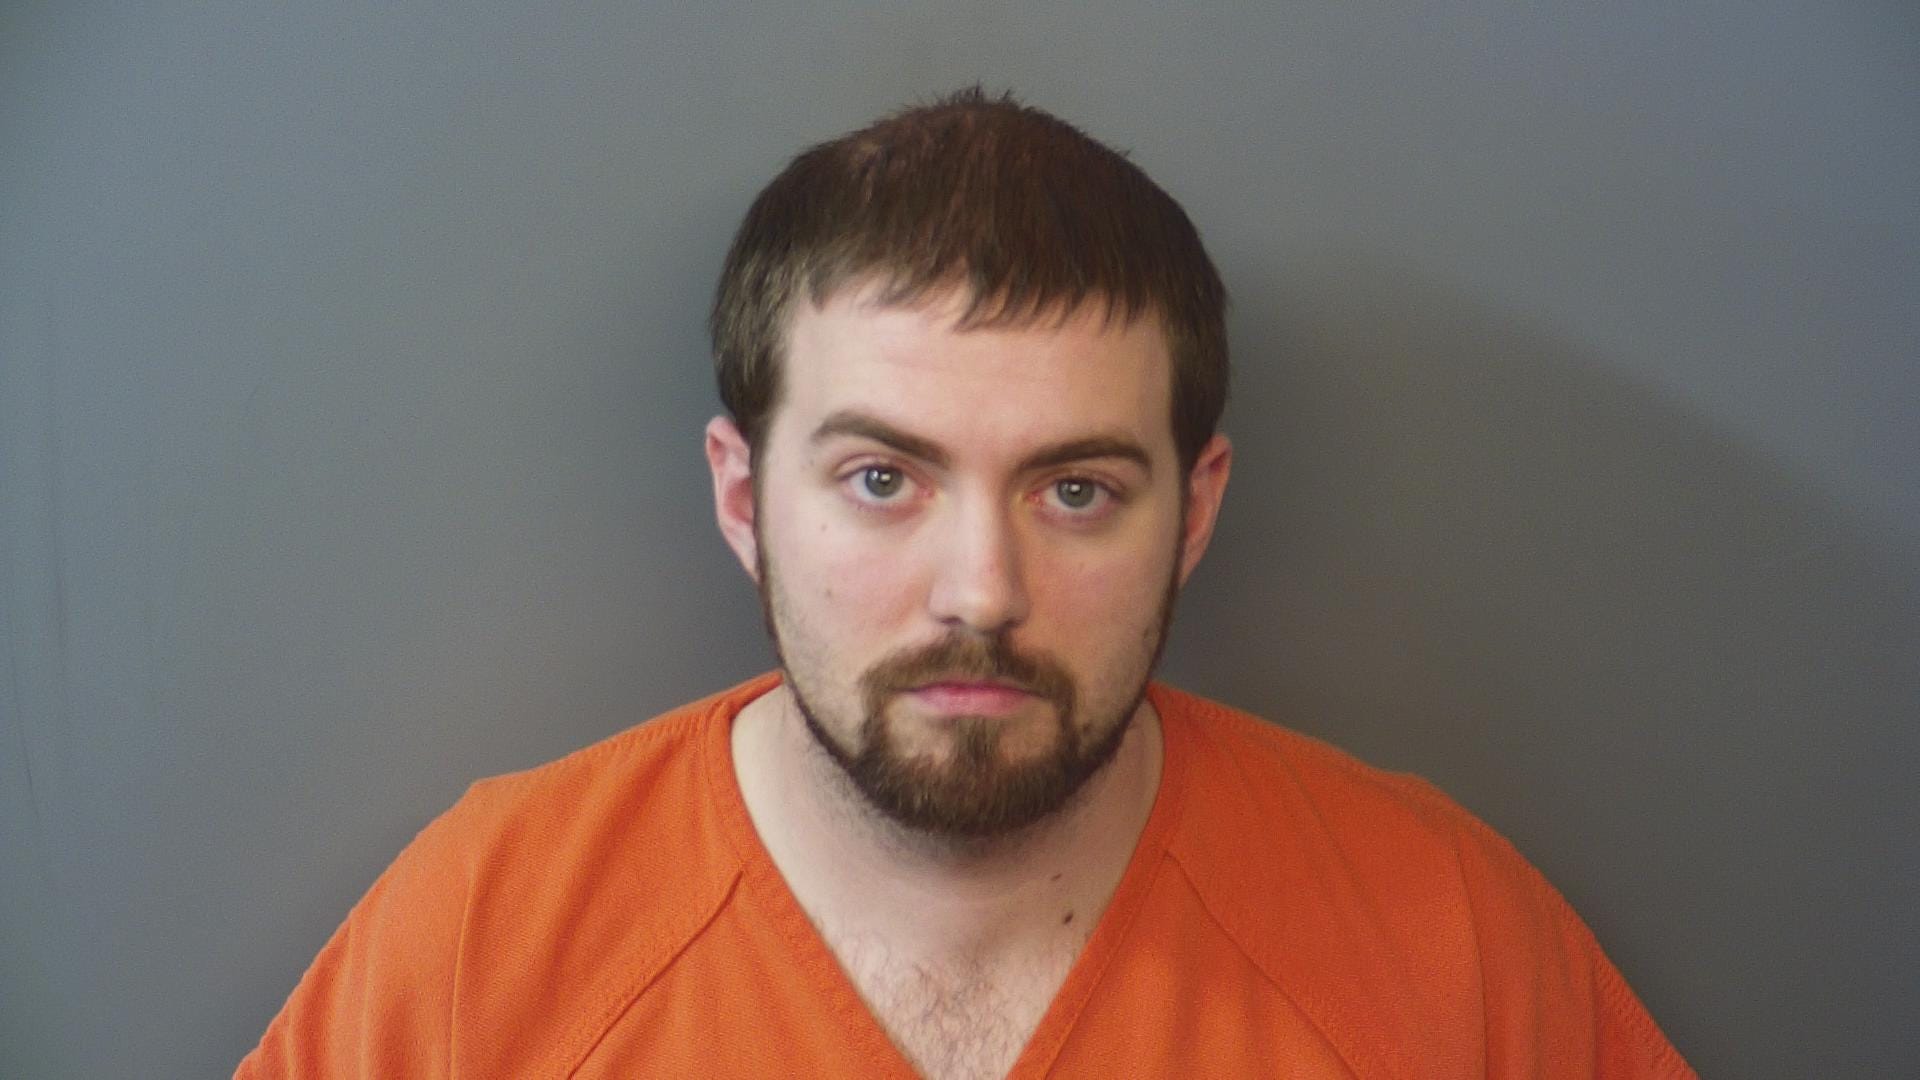 Danville man charged in 4-year-old&apos;s &apos;heinous&apos; death